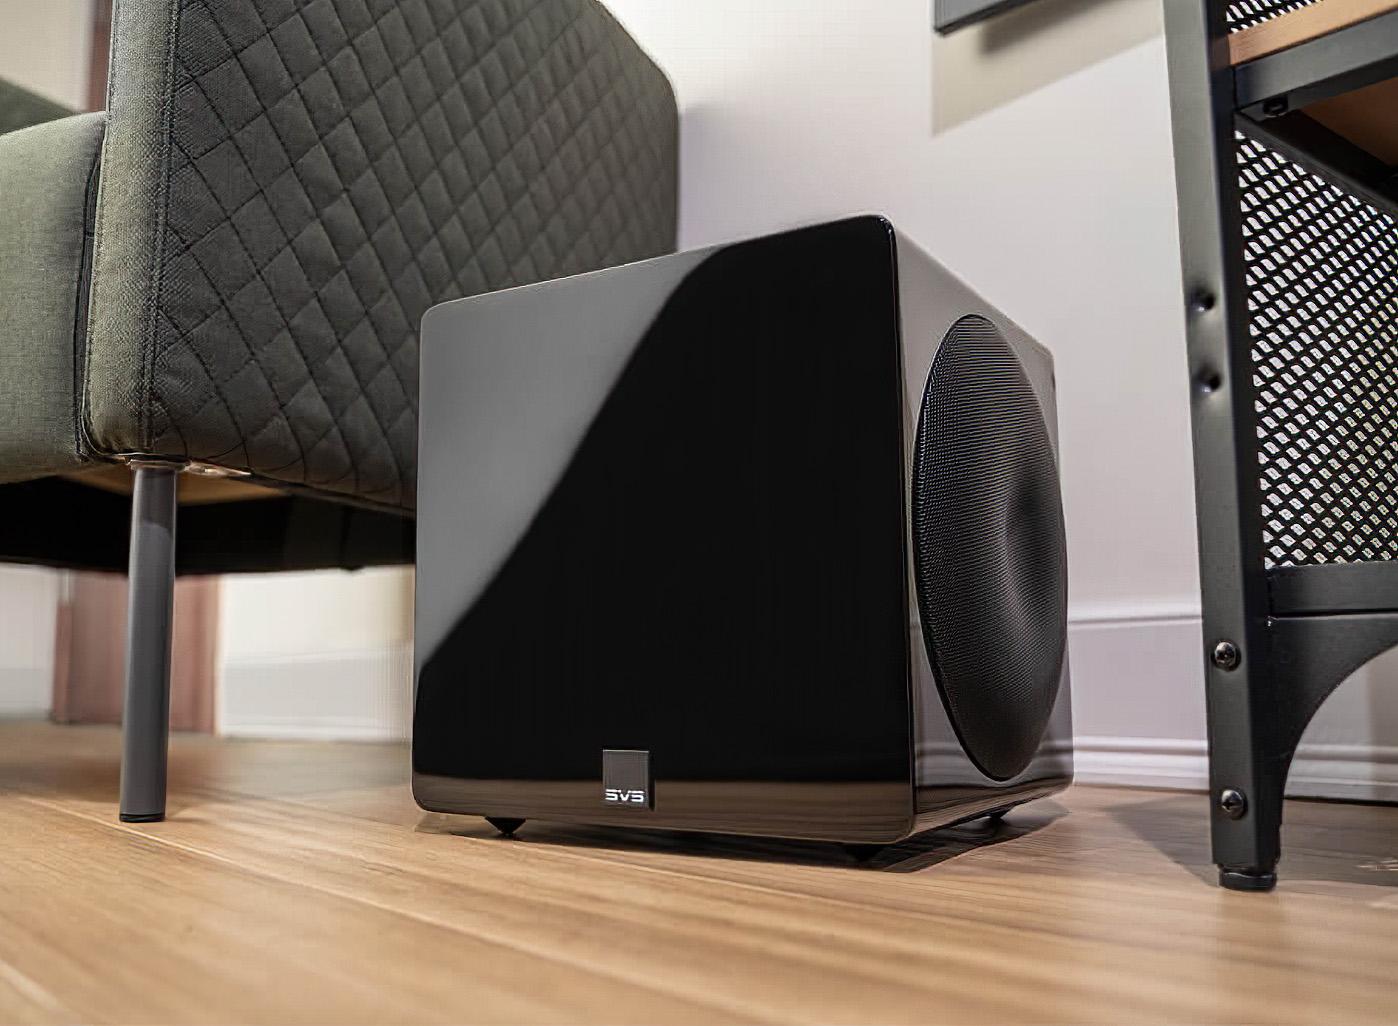 SUB8S Home Theater Powered 8 Slim Subwoofer Down Firing or Wall Mount Sub  